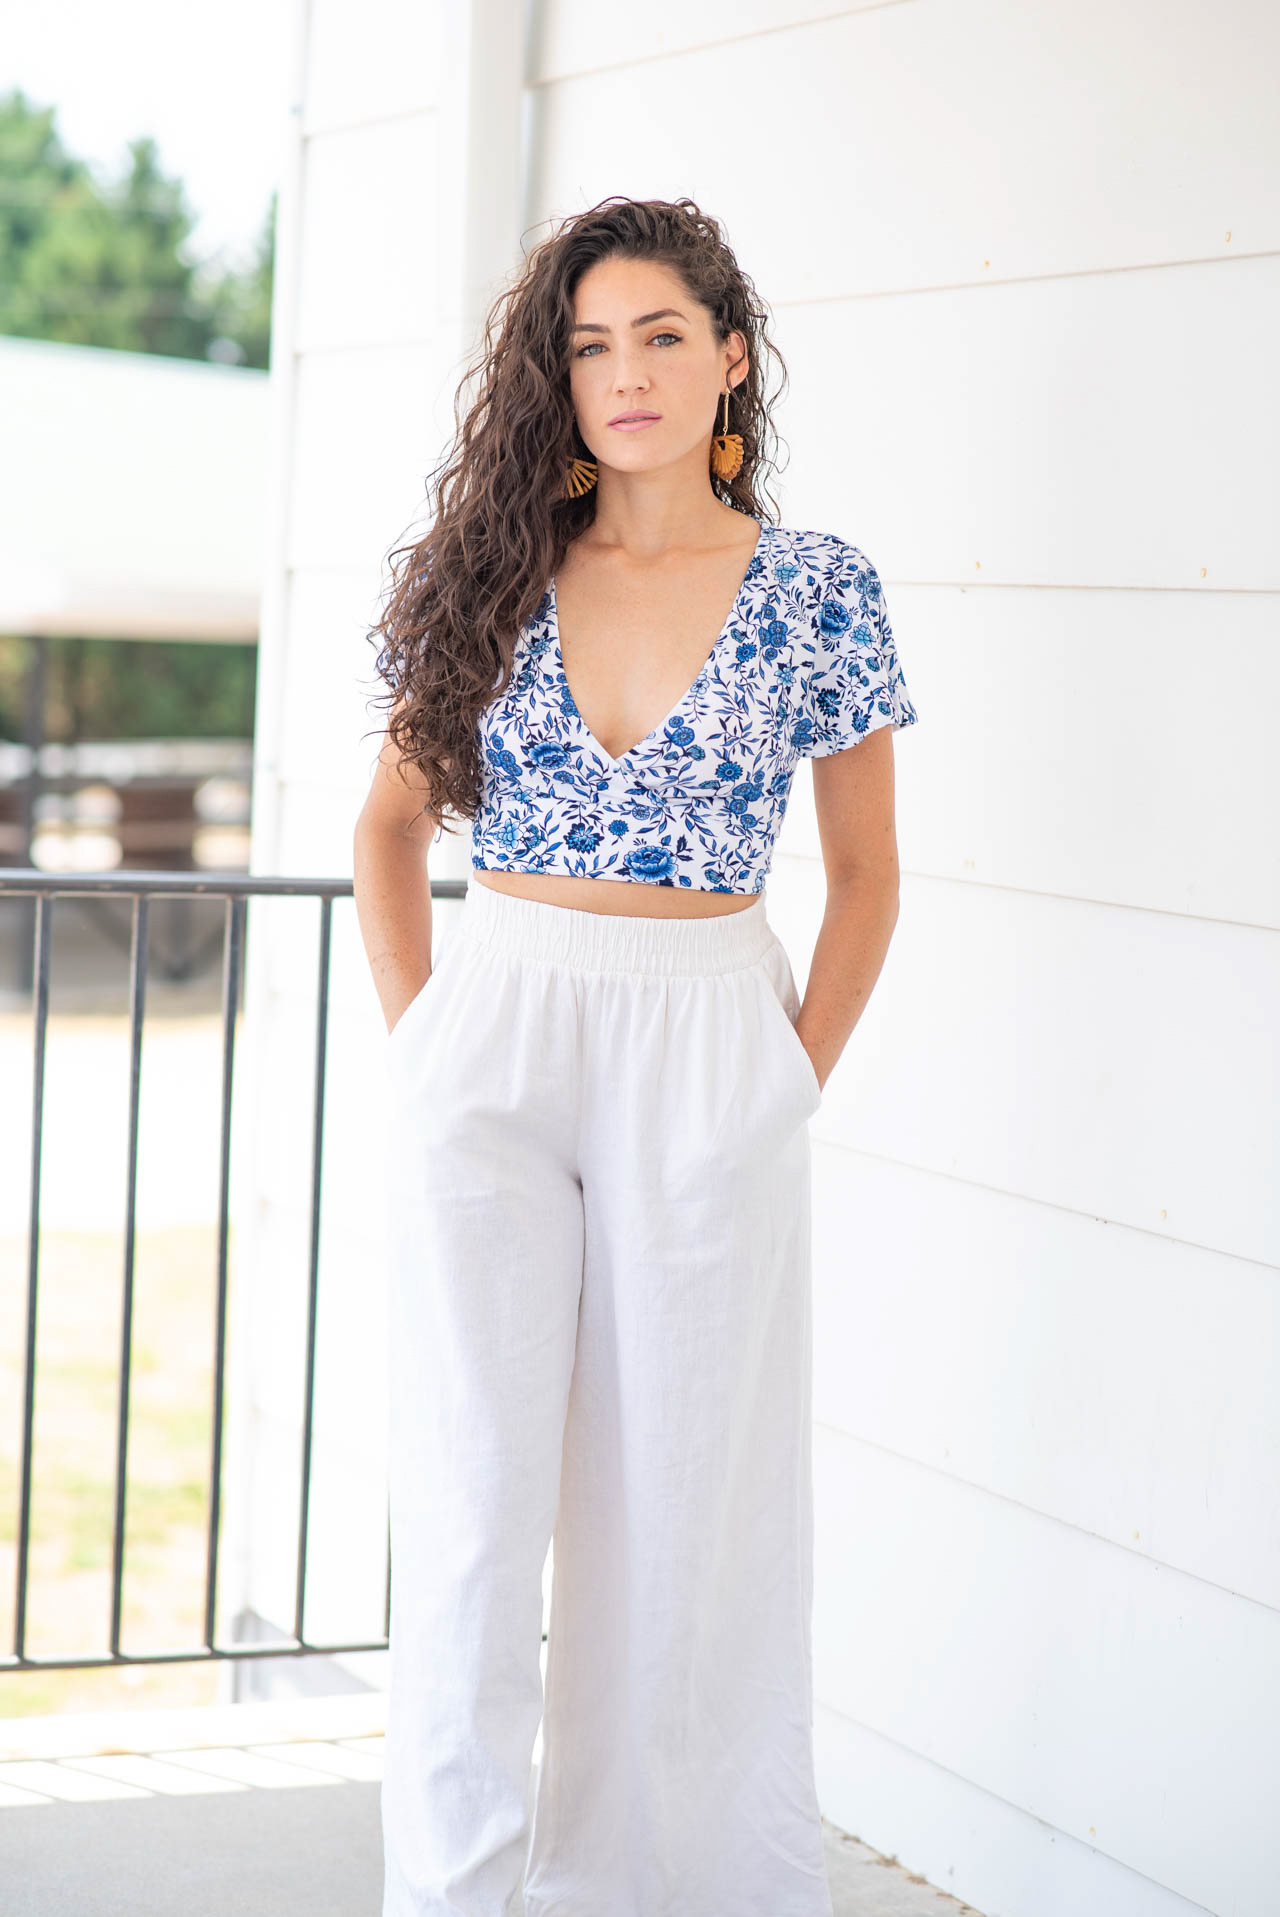 Floral Blue Crop Top & White Pants - Wander Color - a travel & lifestyle blog by Erica Valentin